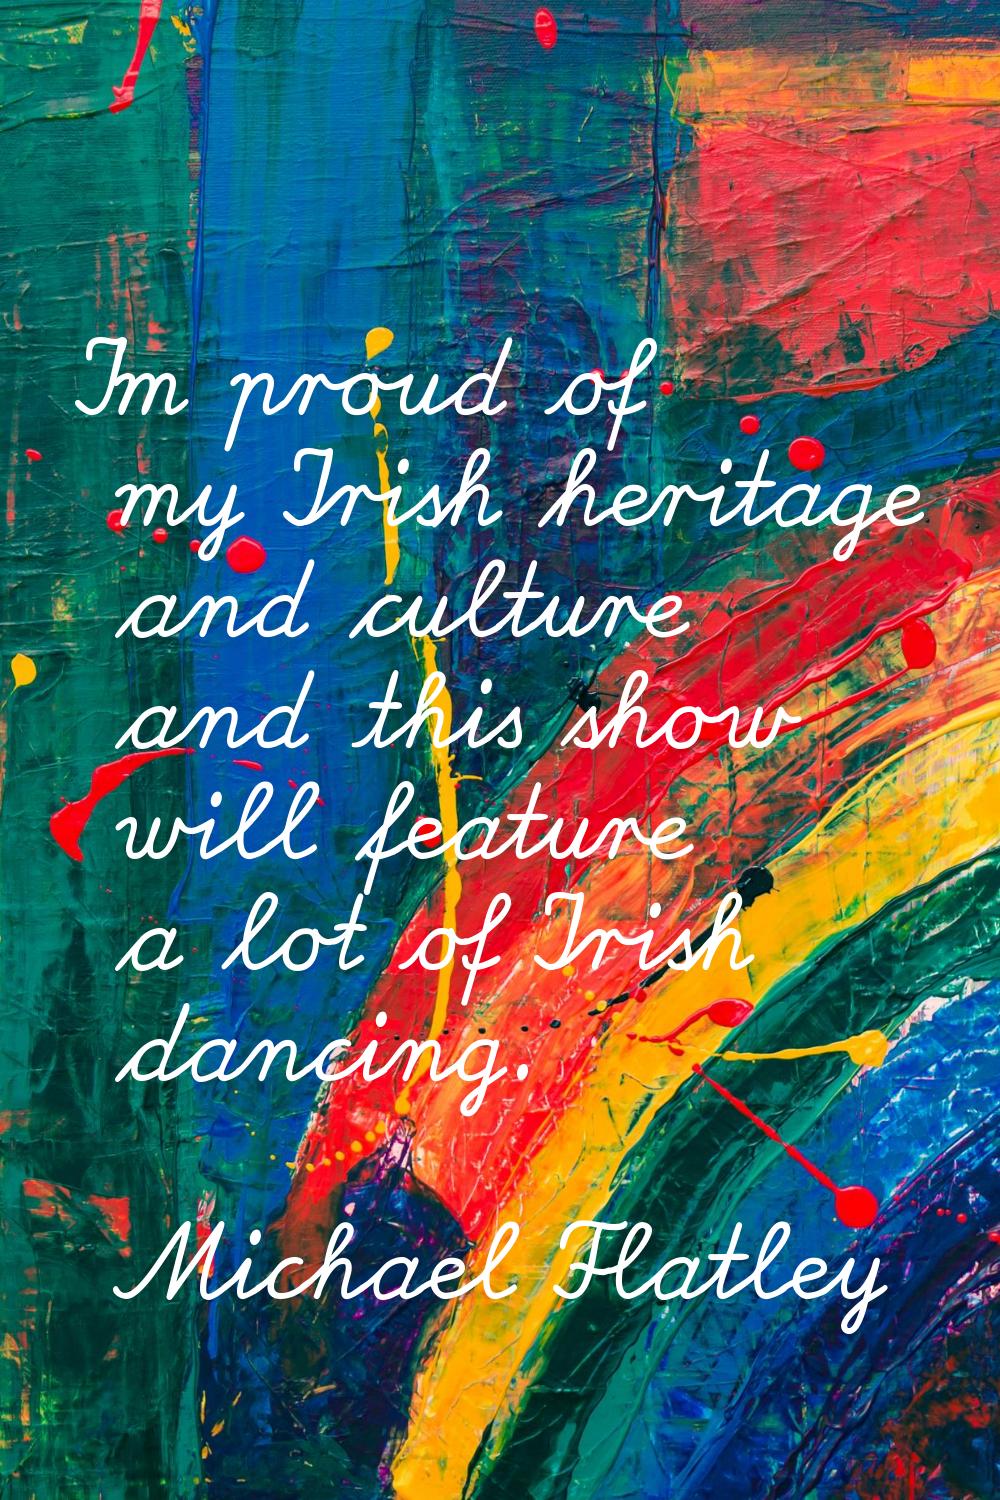 I'm proud of my Irish heritage and culture and this show will feature a lot of Irish dancing.